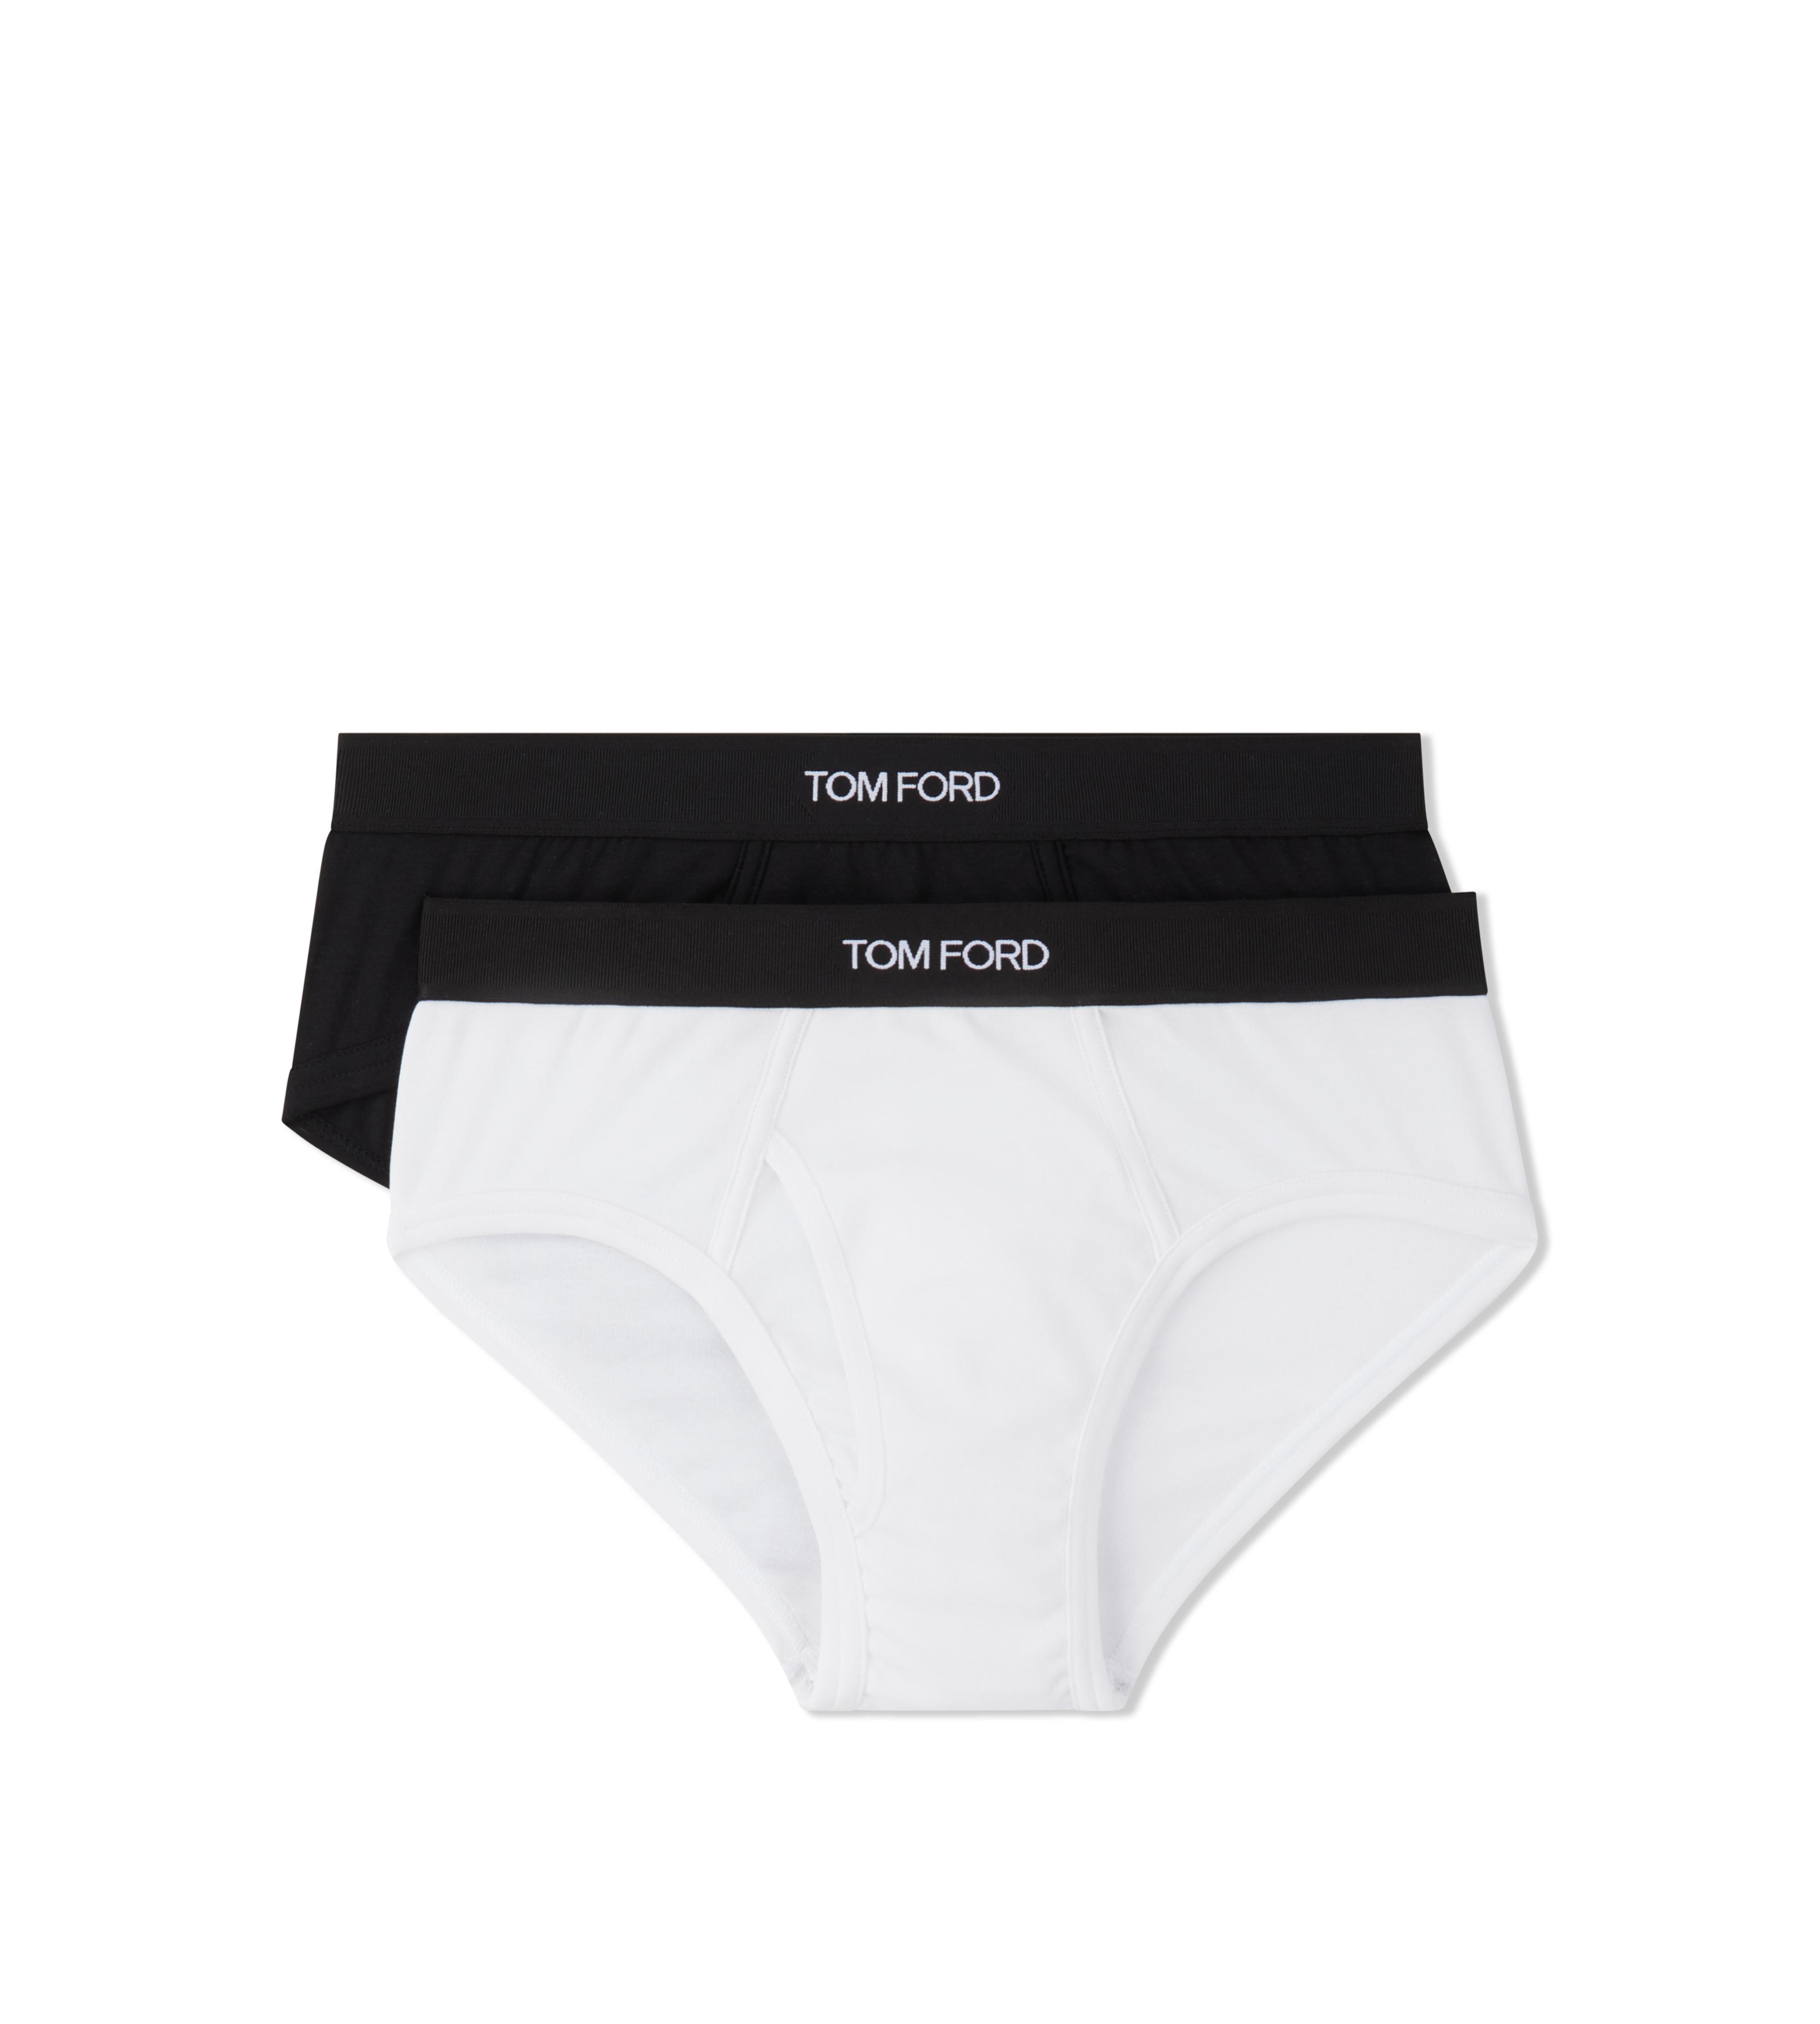 Tom Ford COTTON BRIEFS TWO PACK 